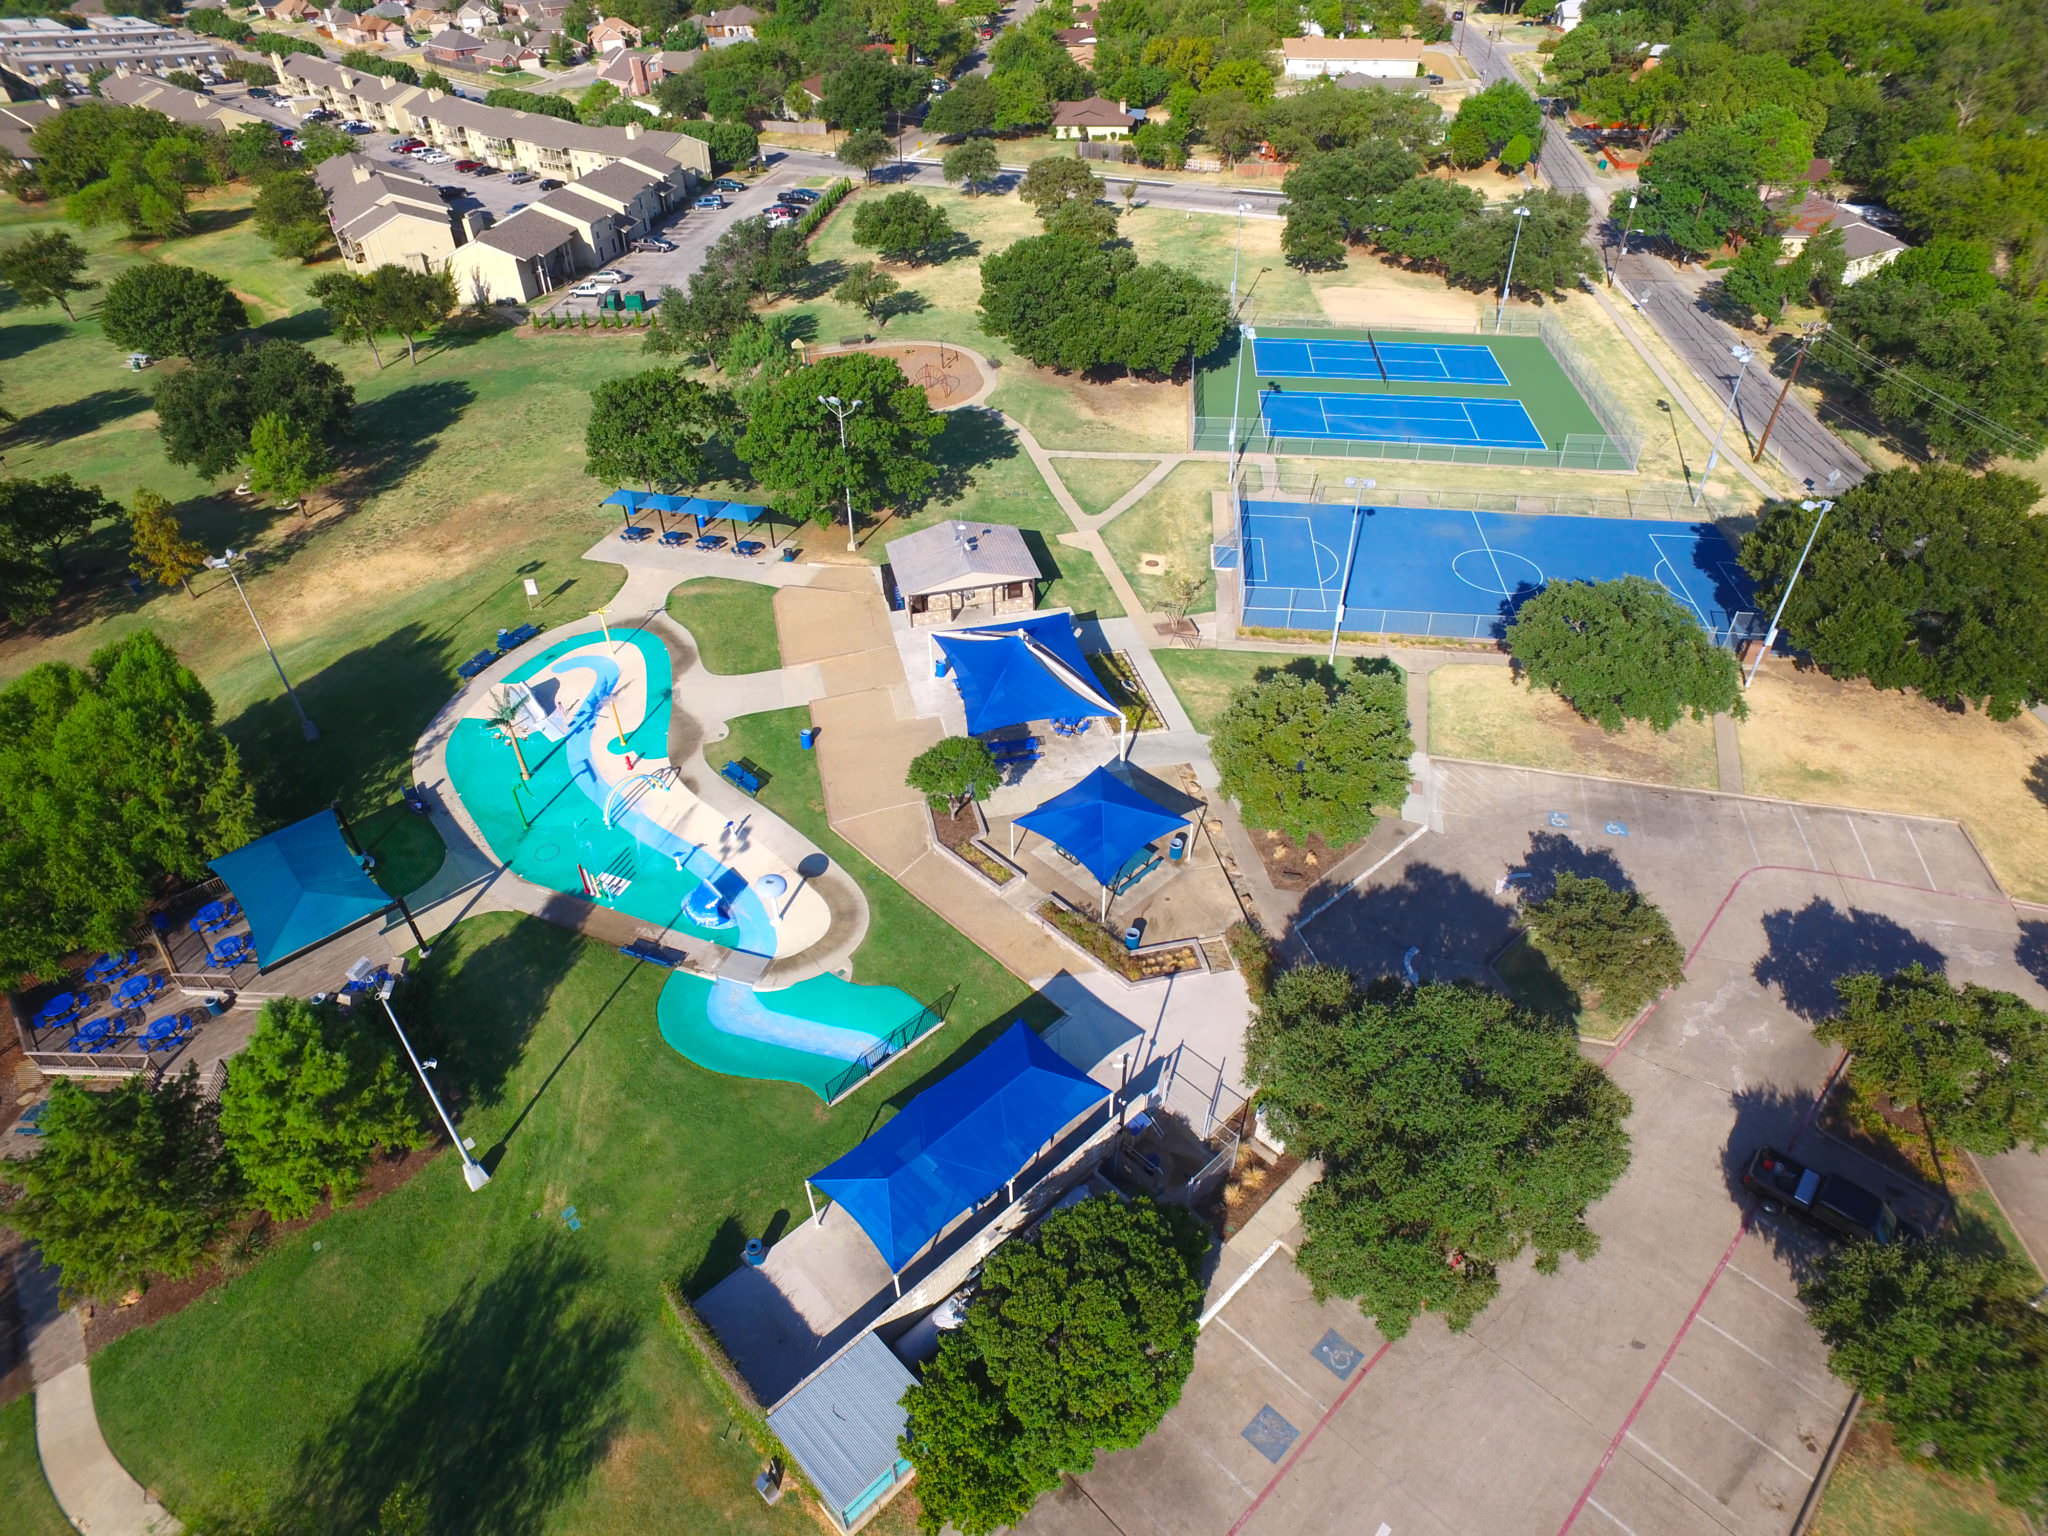 Low-altitude drone photo of a water park north of Dallas, Texas